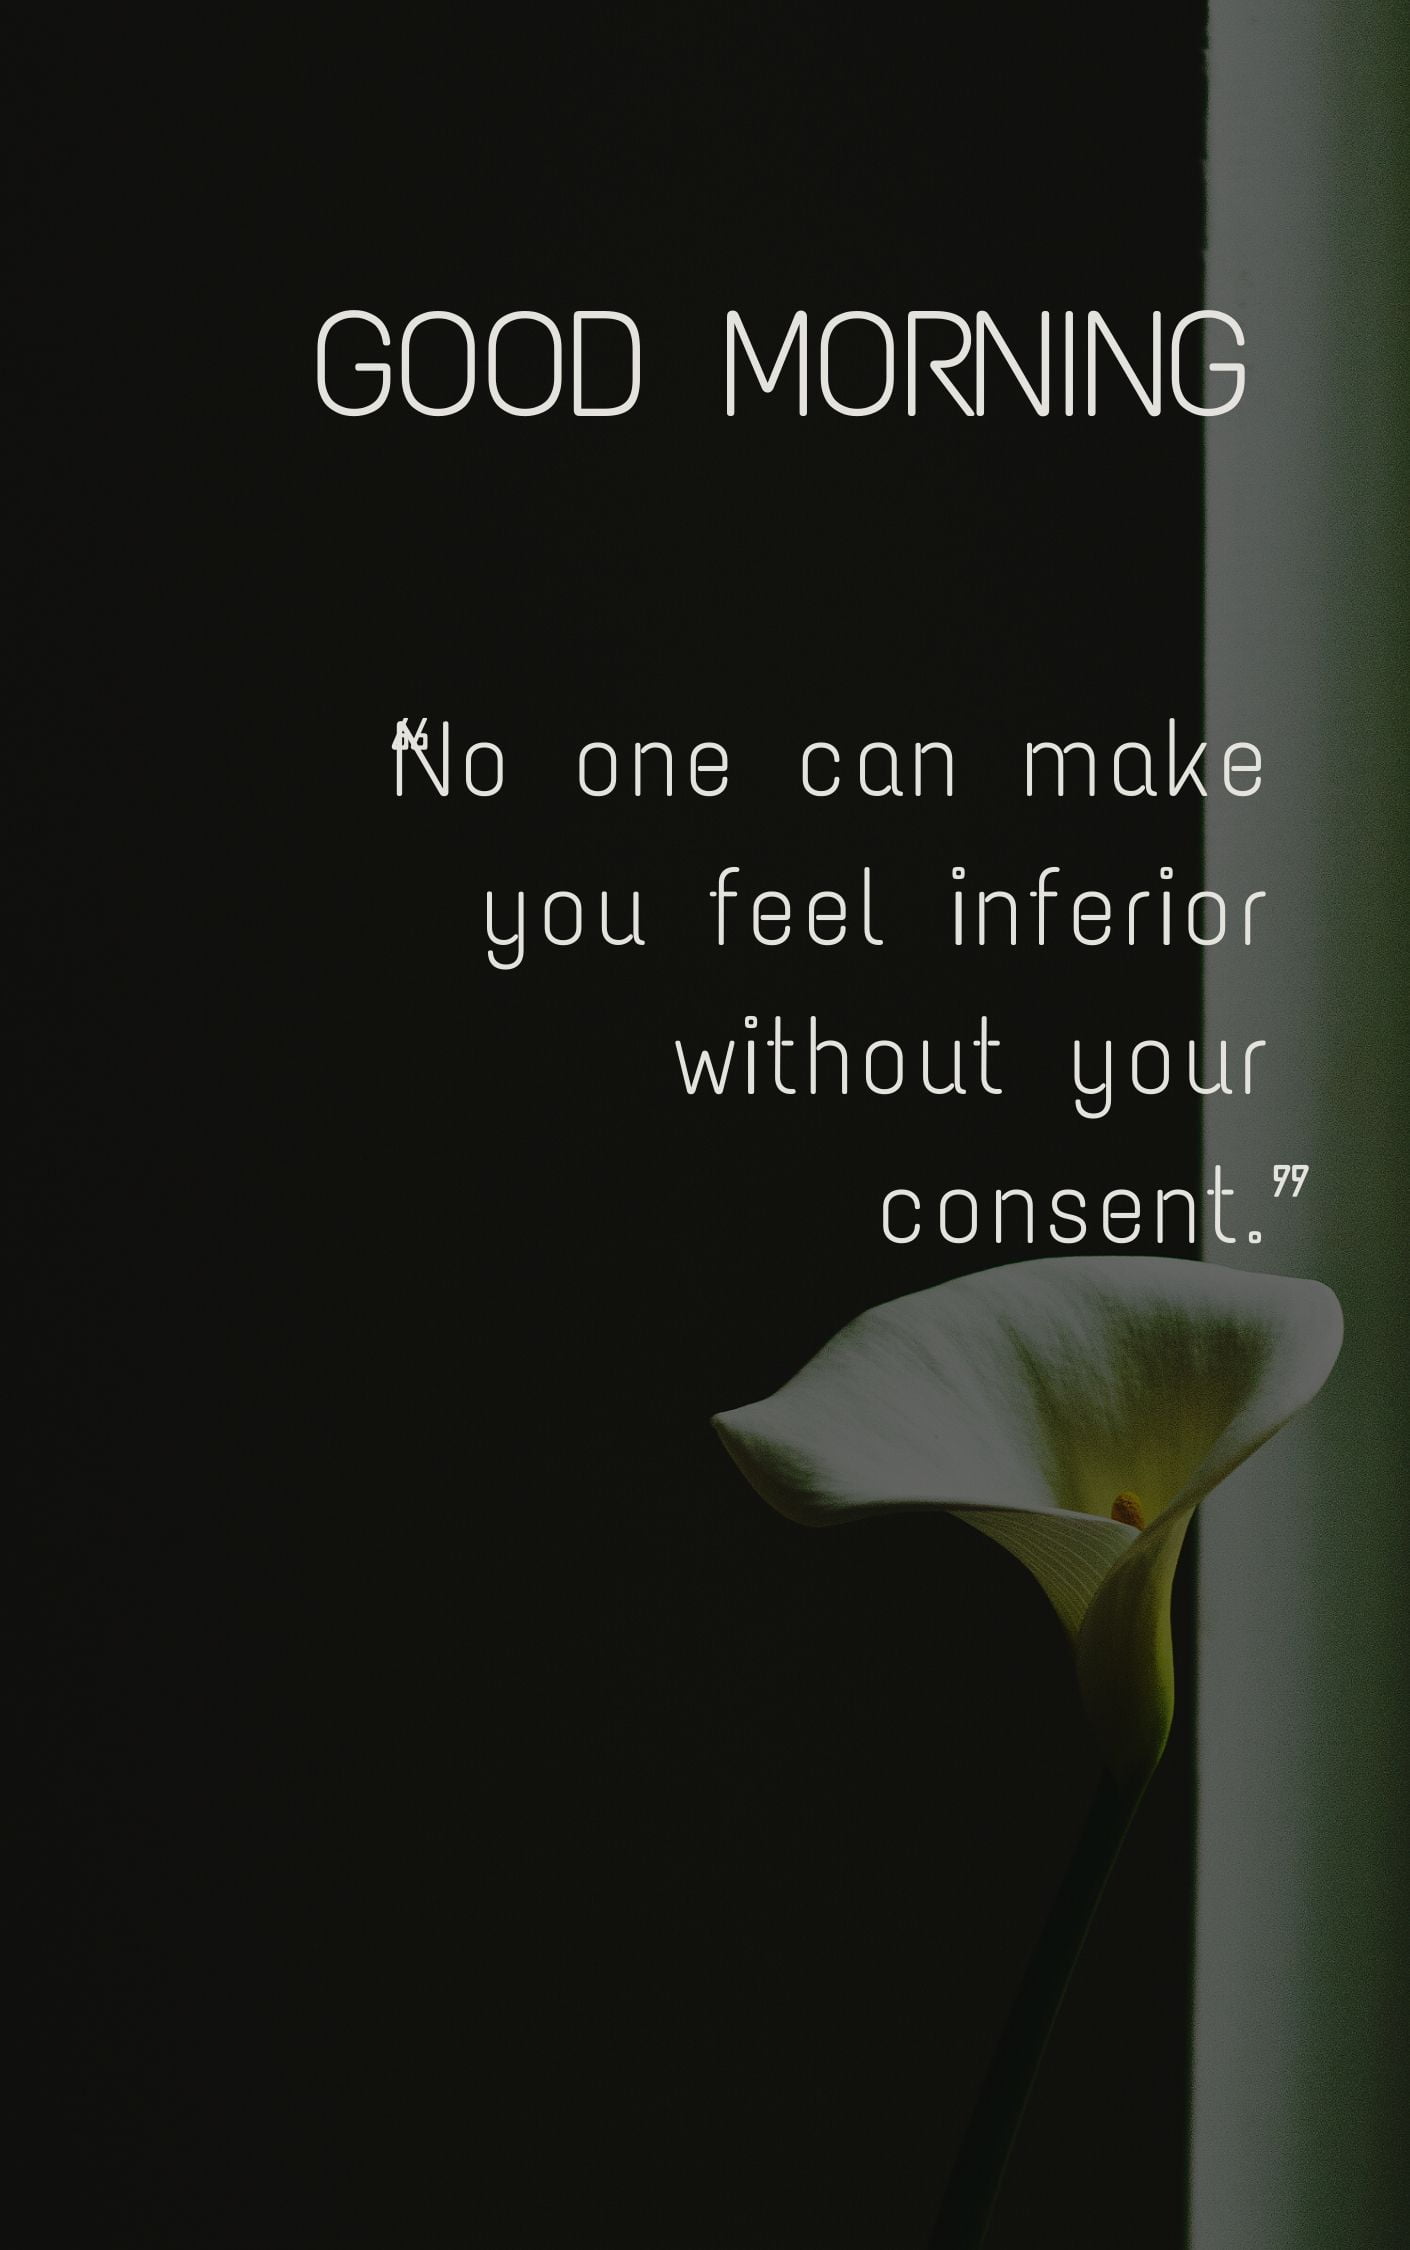 No one can make you feel inferior without your consent Quote Good Morning Image full HD free download.